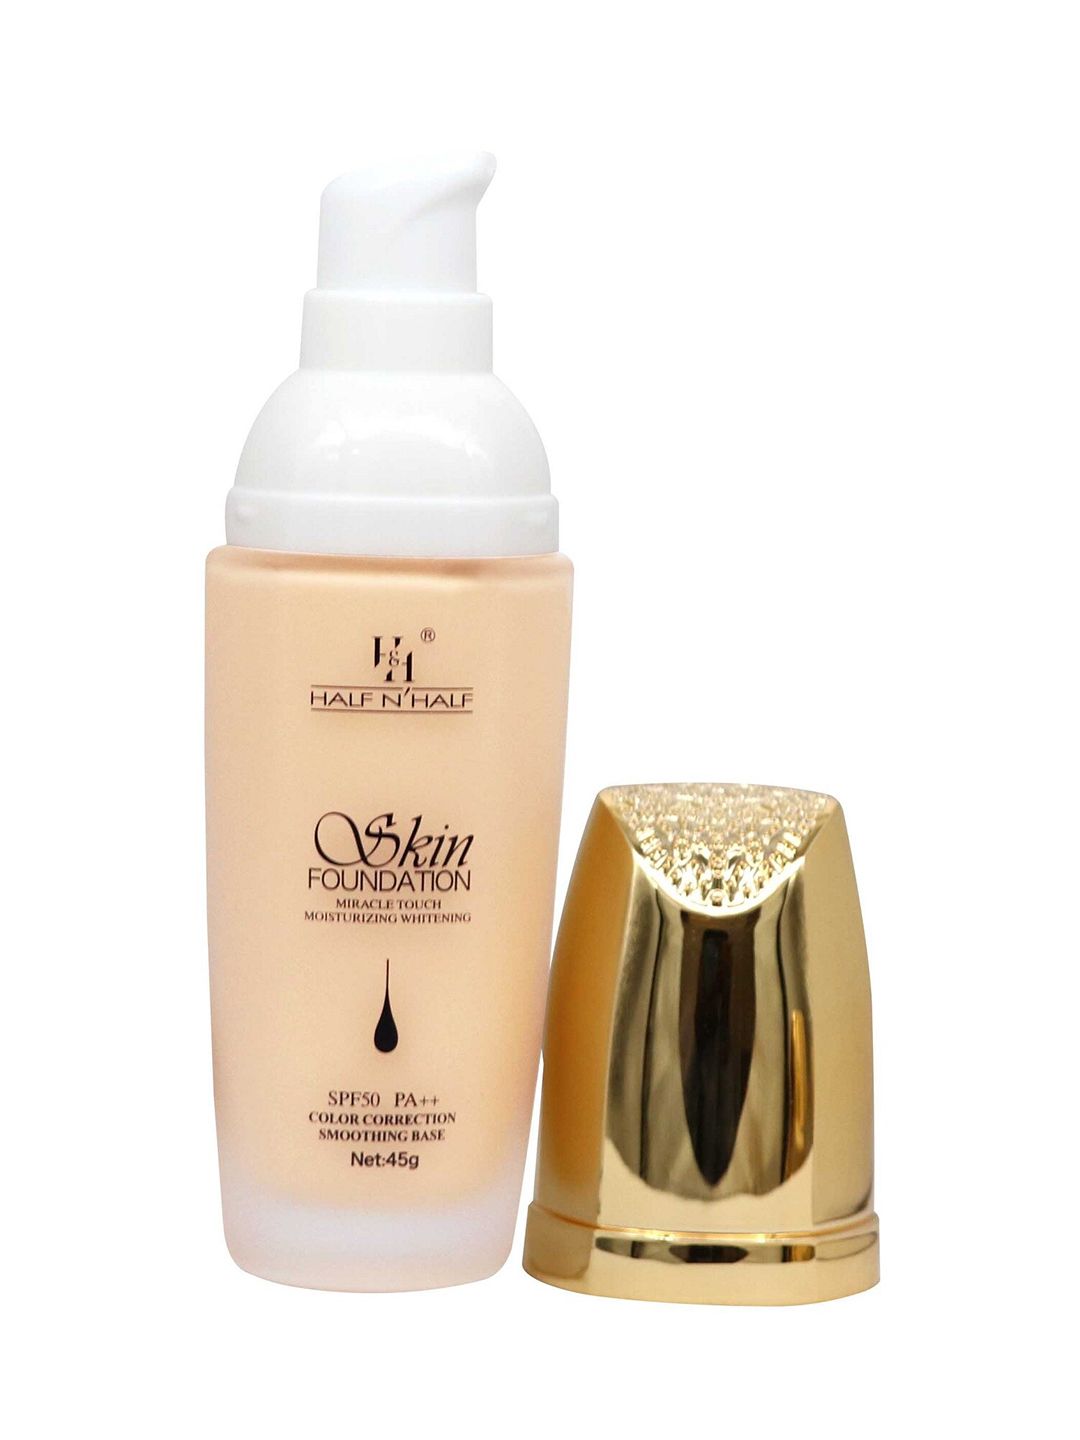 Half N Half Foundation Miracle Touch Moisturizing Whitening - SPF 50 PA++ - Natural Beige Price in India